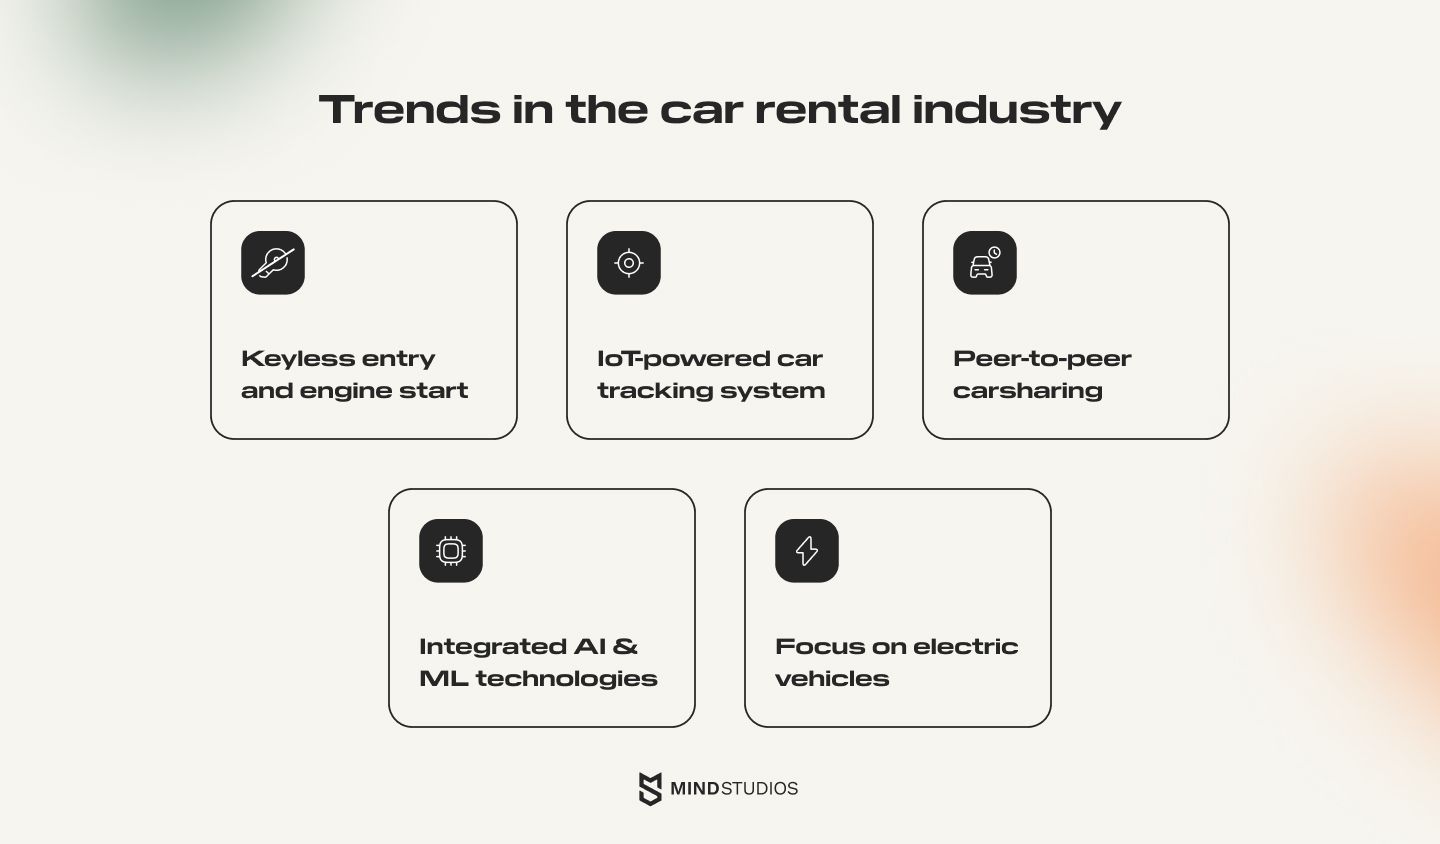 Trends in the car rental industry